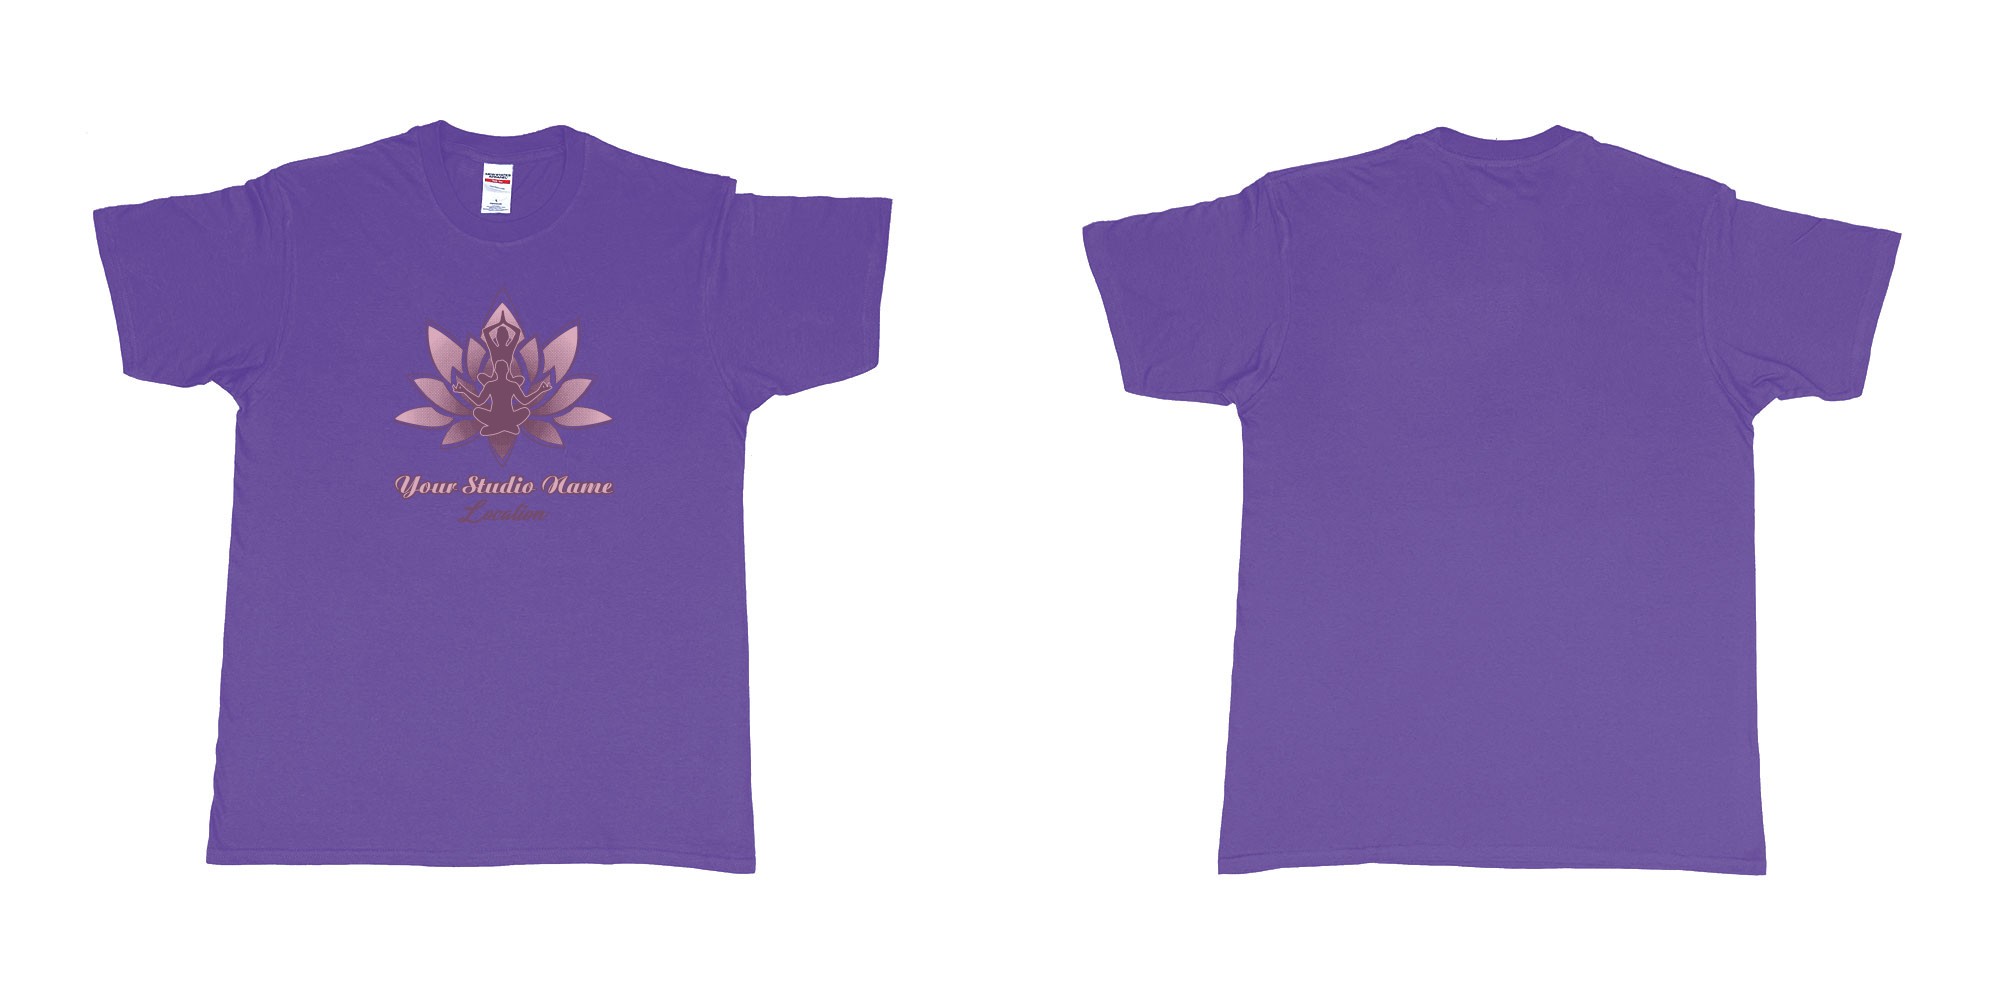 Custom tshirt design yoga meditation lotus own studio t shirt screen printing bali in fabric color purple choice your own text made in Bali by The Pirate Way